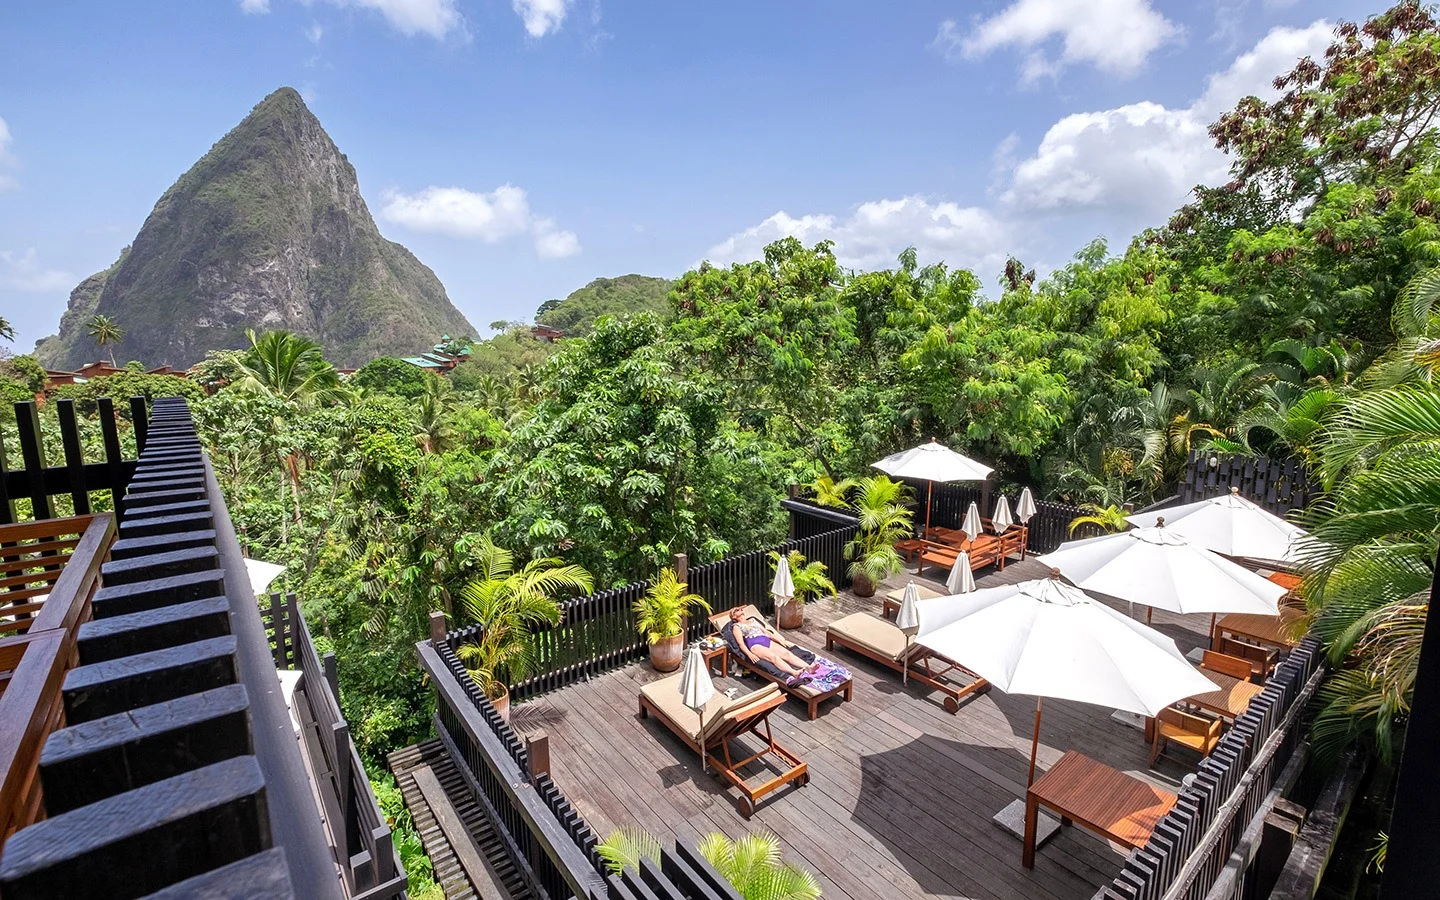 The Rabot Hotel by Hotel Chocolat hotel in Soufrière, St Lucia, with views of the Pitons